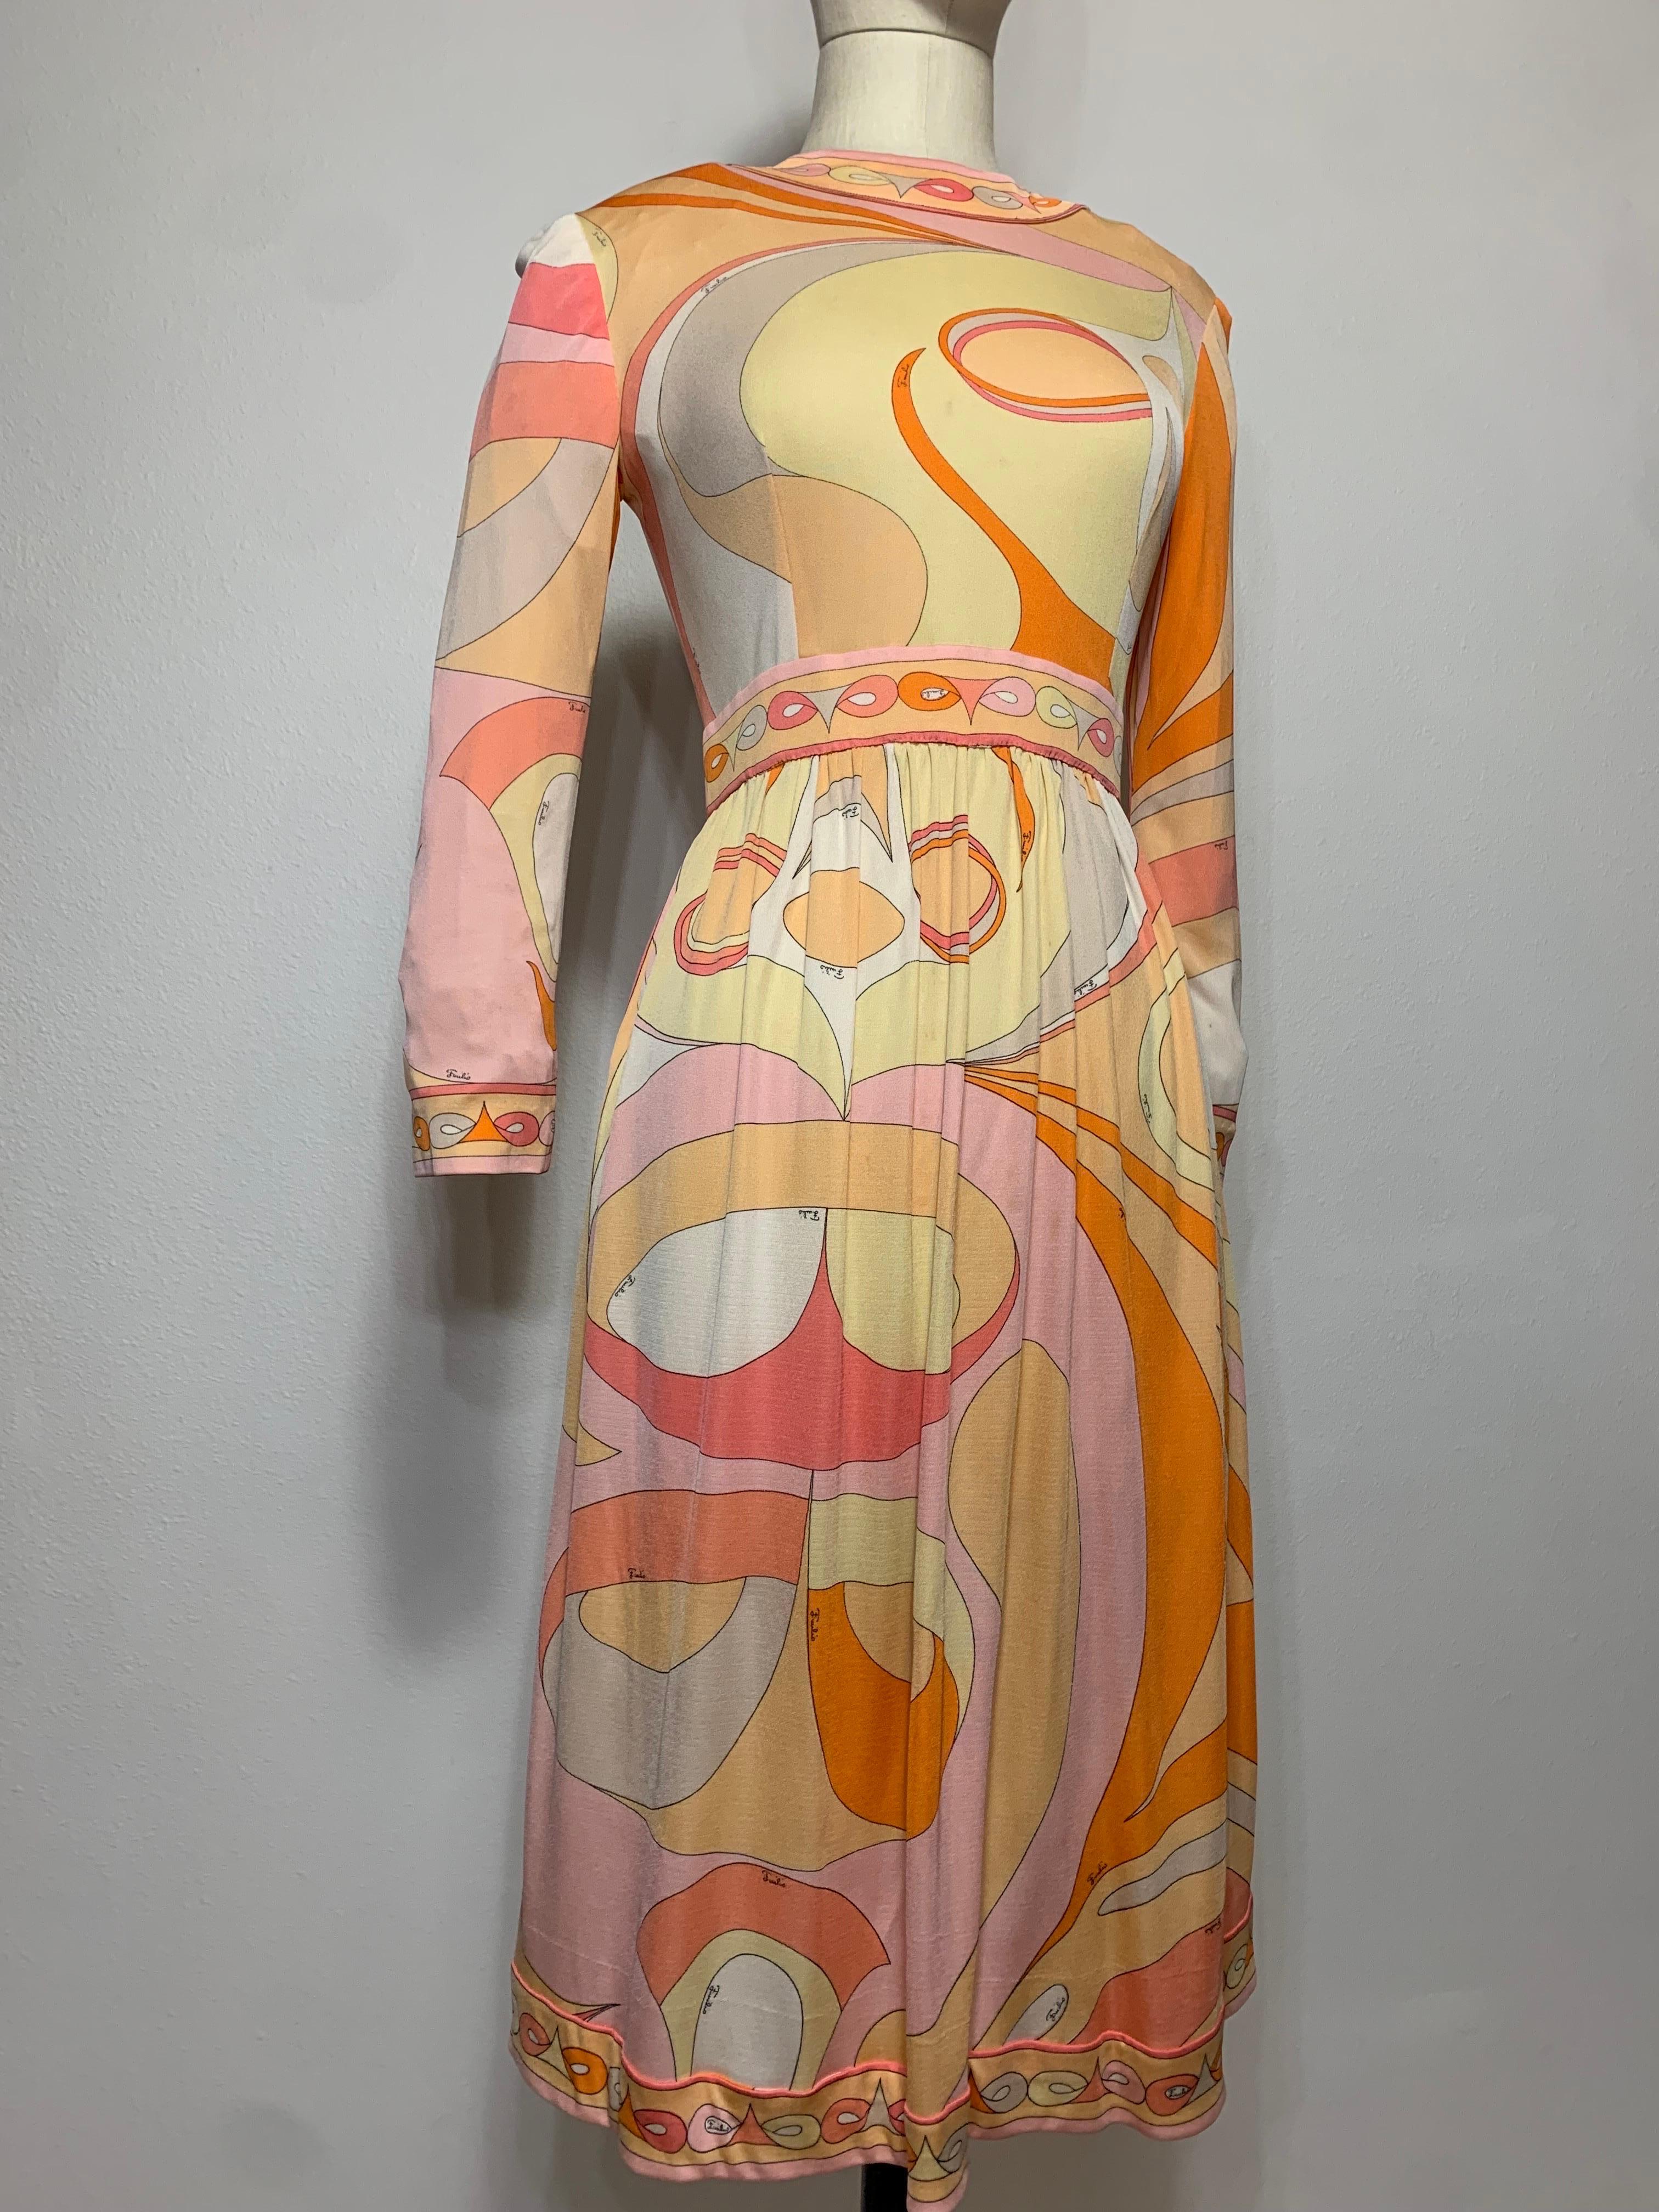 1960s Emilio Pucci Psychedelic Print Mod Silk Jersey Day Dress w Full Skirt in Tangerine, Pink and Yellow:  Banded waist and neckline with gathered skirt 3/4 length sleeves. Full back zipper. US size 4-6.  